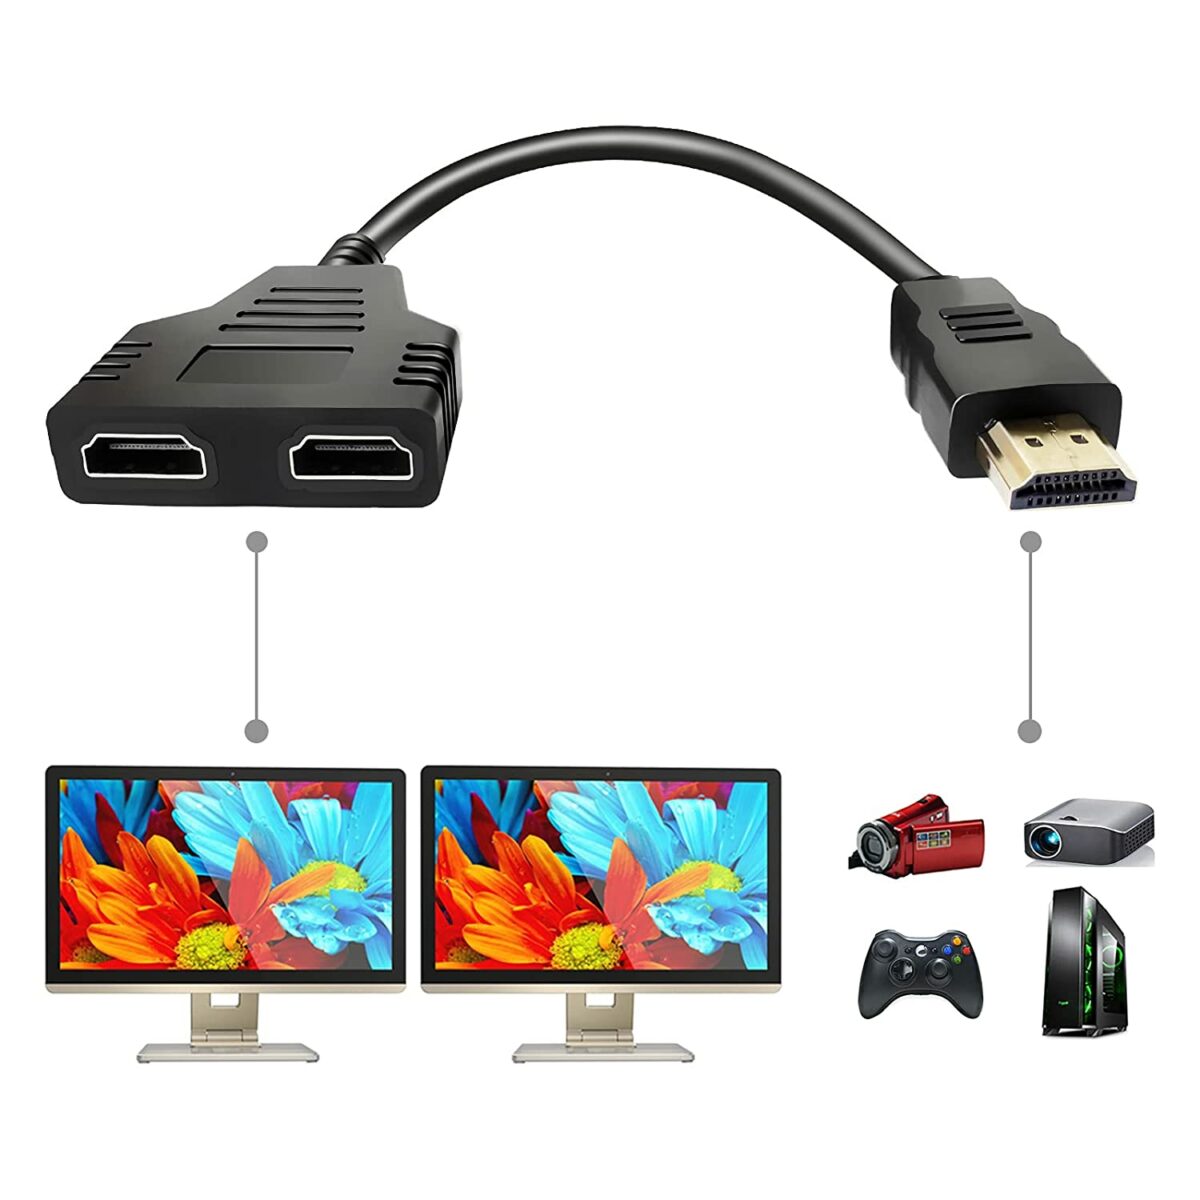 HDMI Splitter Adapter Cable (1 in HDMI Male to 2 Out HDMI Female)